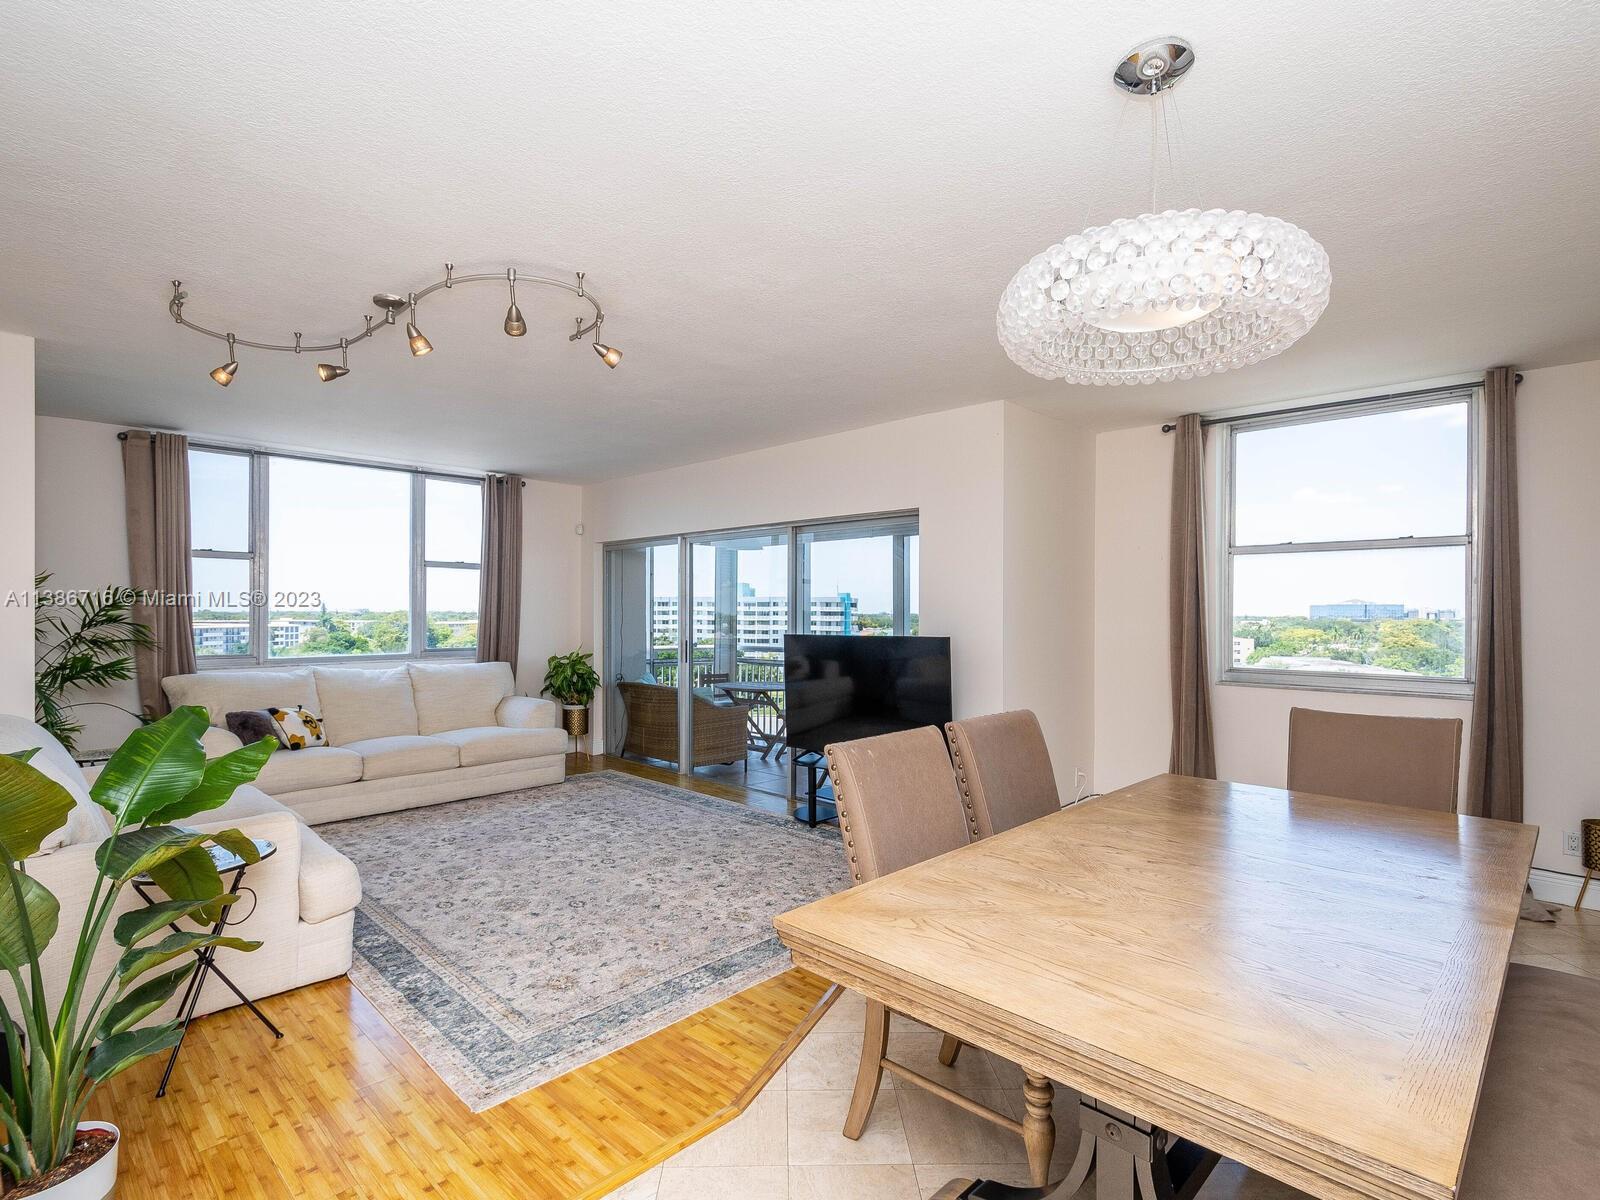 SPECTACULAR CORNER UNIT 2 bed/2 full bath, FULL OF LIGHT, with stunning panoramic view of sunrises a